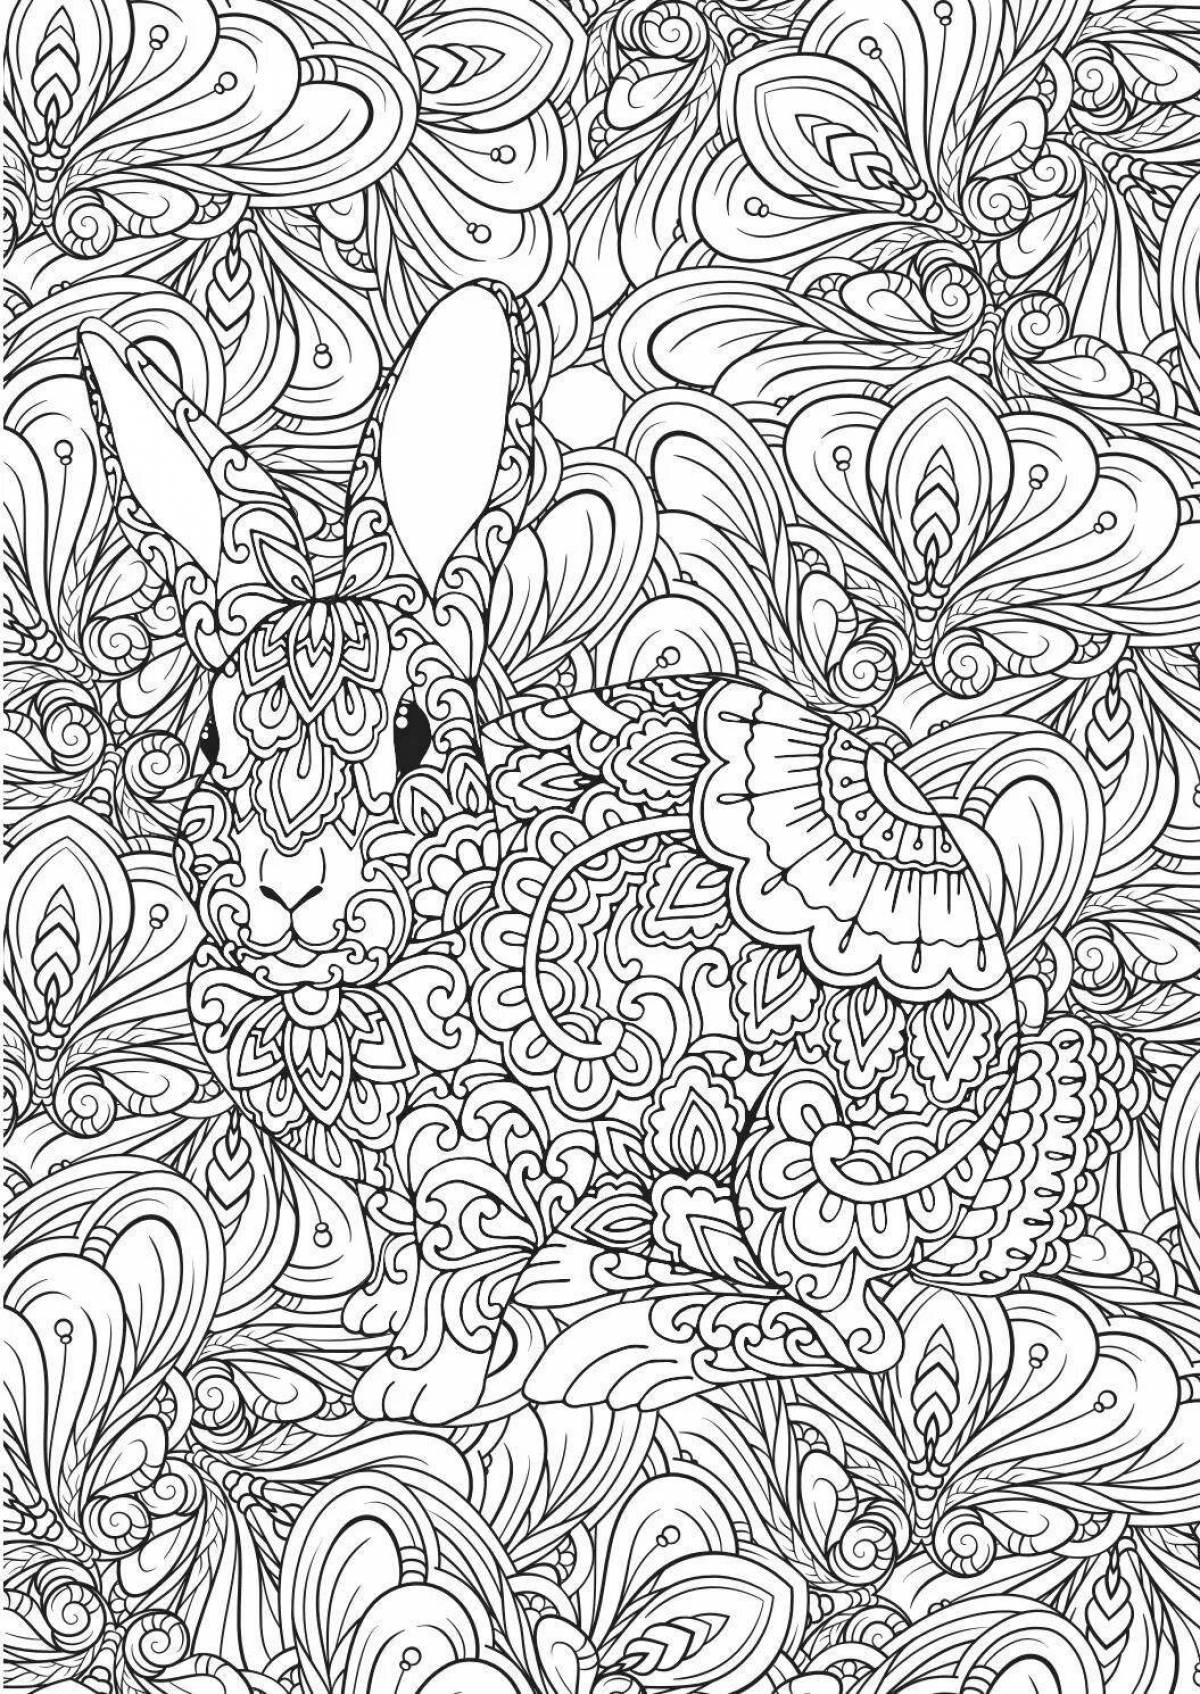 Terrifying coloring book very hard for girls